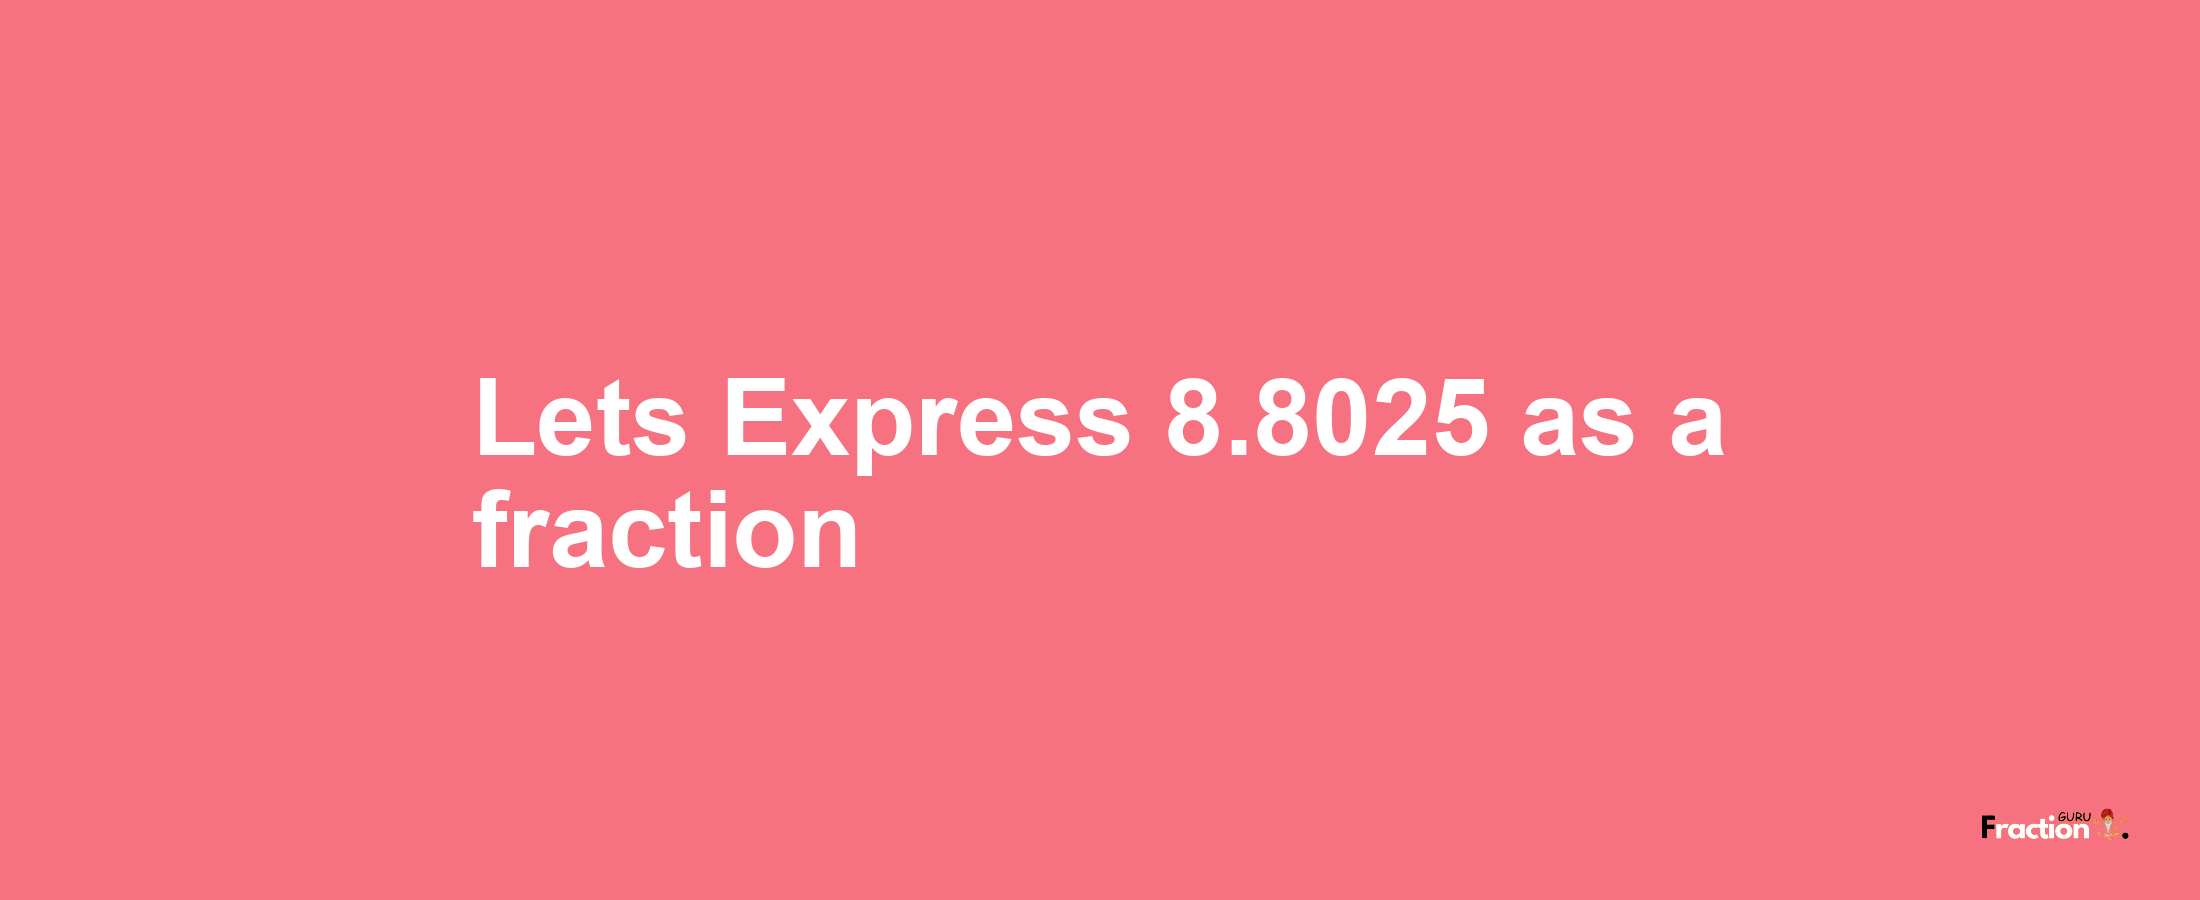 Lets Express 8.8025 as afraction